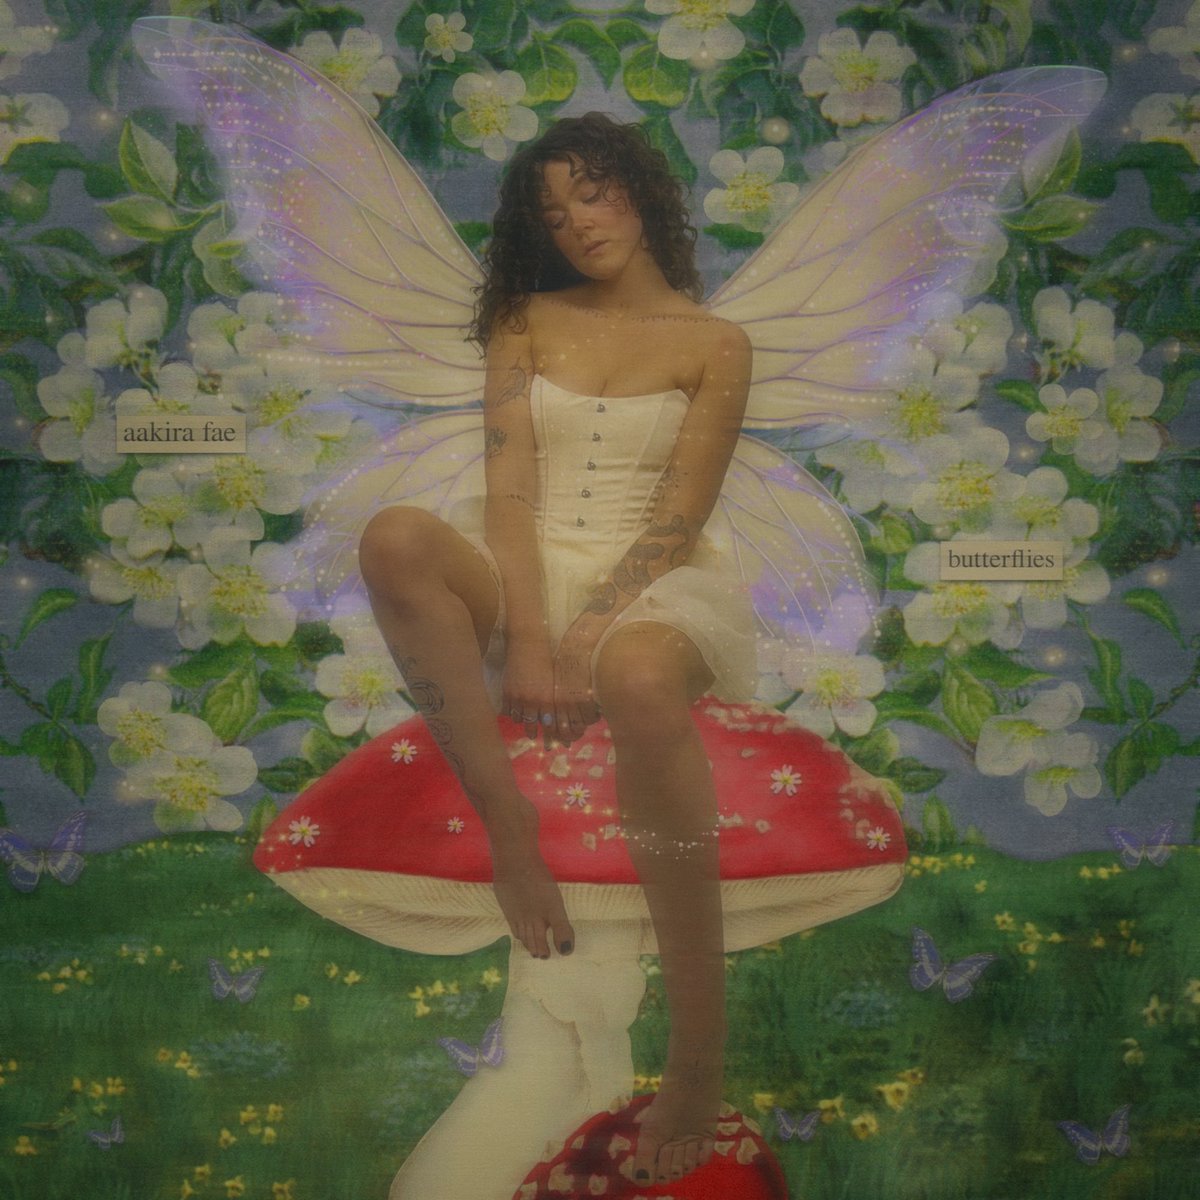 Enchanting debut: aakira fae unveils ‘butterflies’. A dreamy ethereal voyage into alt-pop and neo-soul 'the butterfly represents transformation, growth, change, as does the word 'akira', meaning dawn and rebirth' famemagazine.co.uk/enchanting-deb…